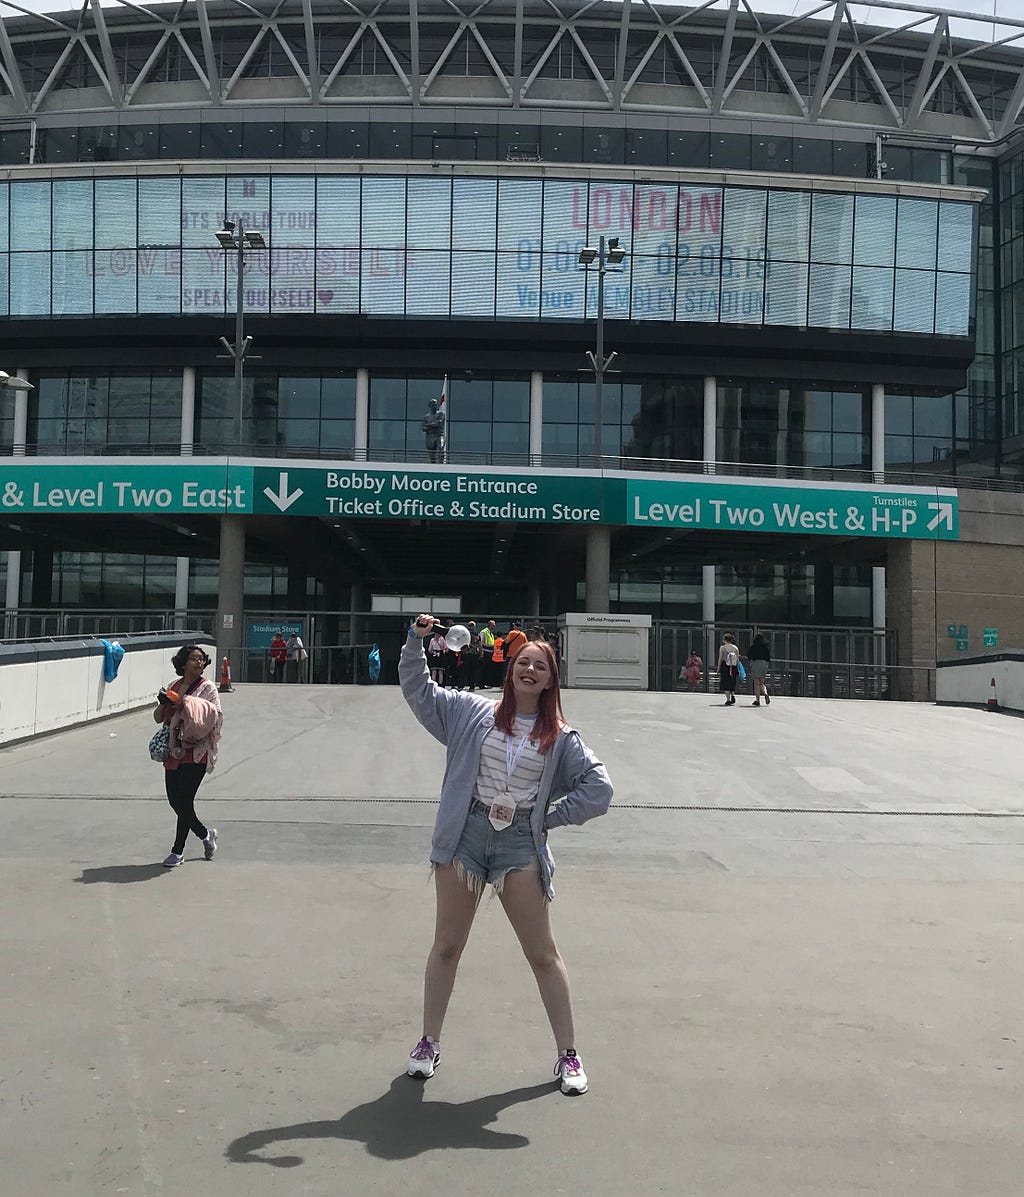 Author (female, white, 21) stands in front of Wembley Stadium in denim shorts and a grey hoodie holding an ARMY Bomb.